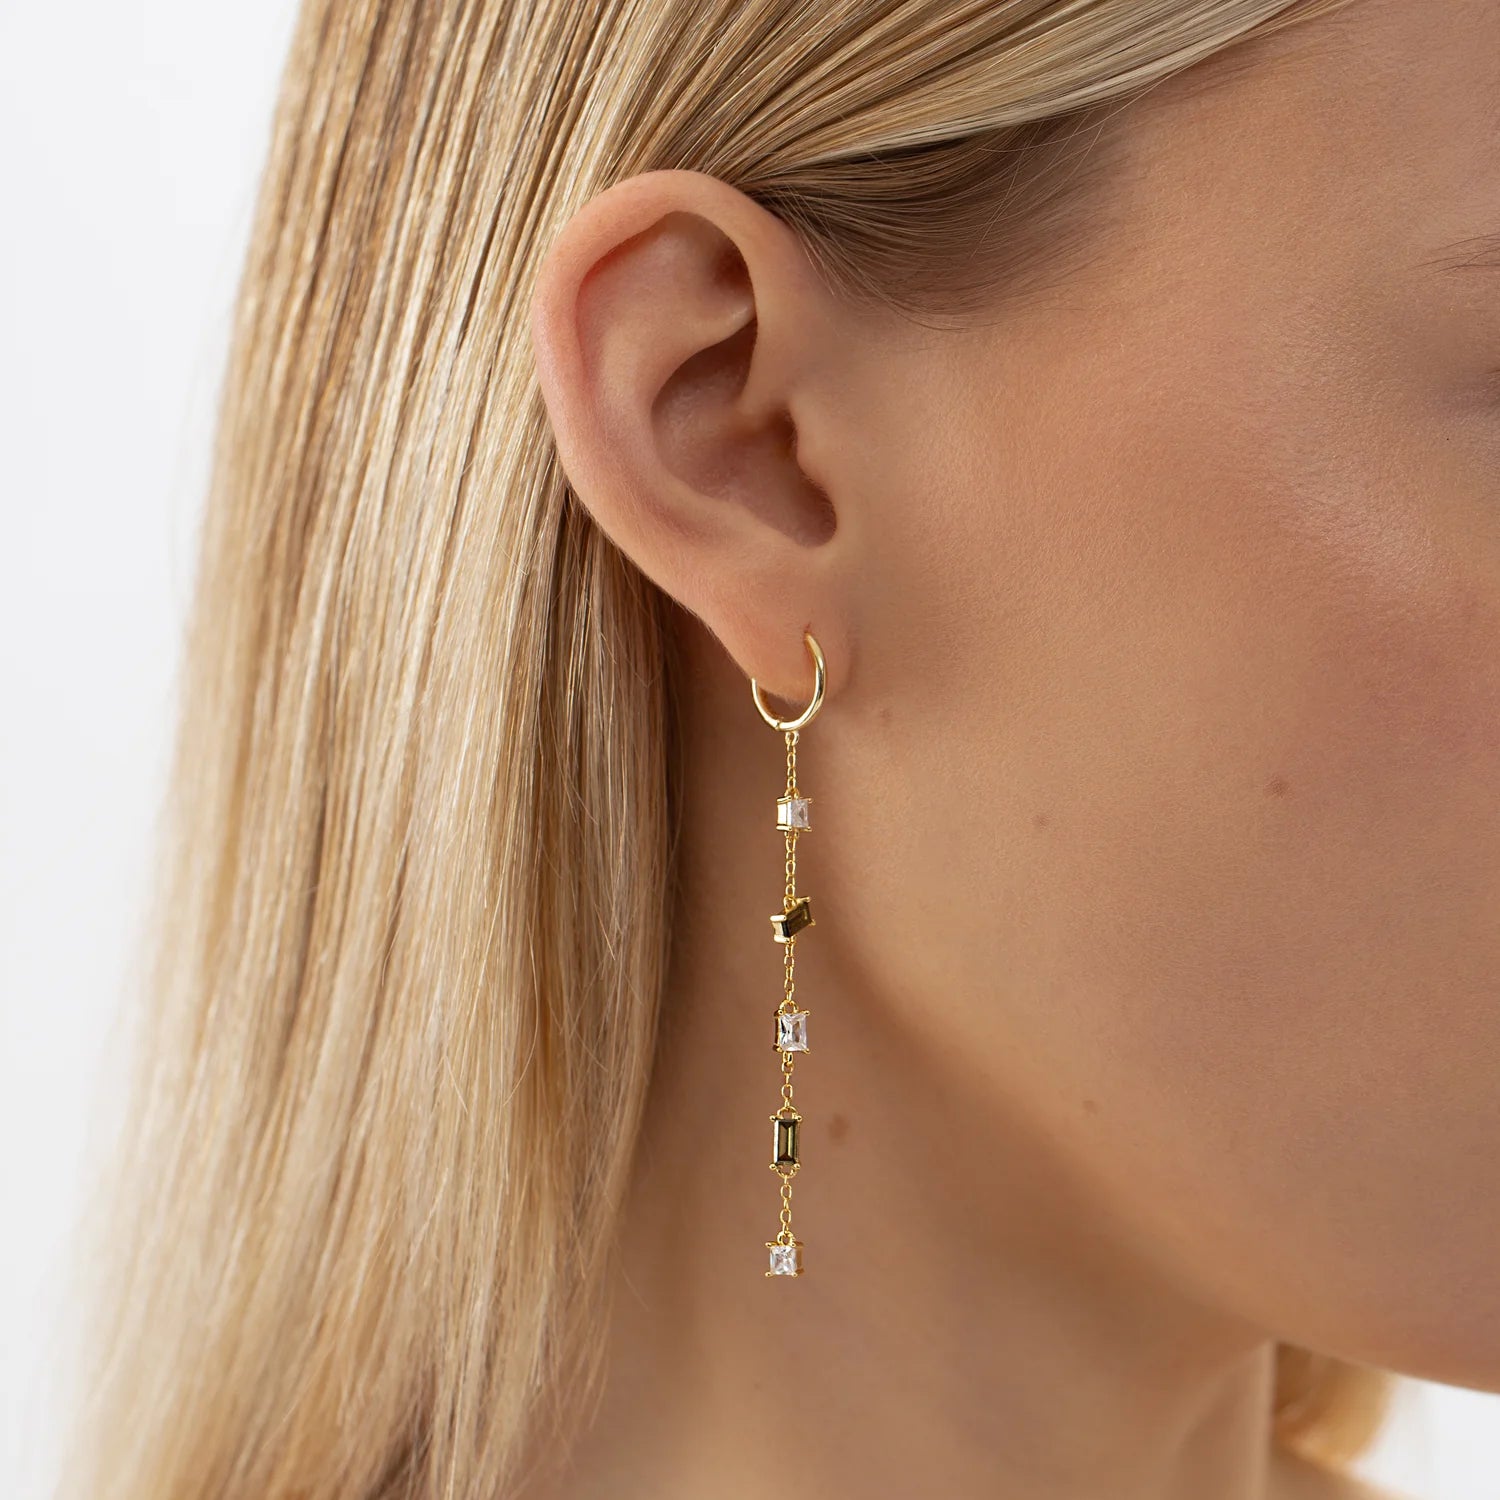 Close-up of a woman's ear wearing Hoop Earrings CASCADE in gold, showcasing elegant, sustainable design with 18k gold plating and hypoallergenic materials.